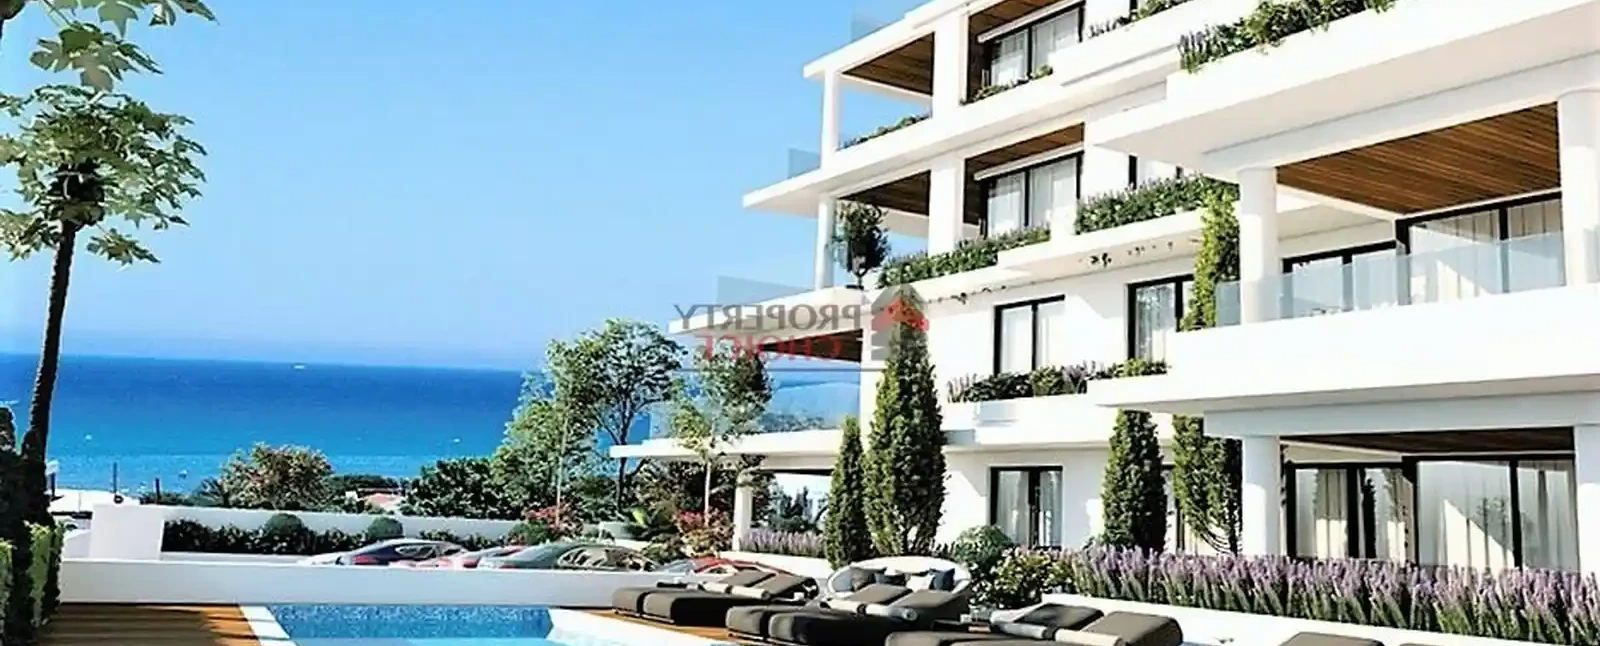 2-bedroom apartment fоr sаle €540.000, image 1